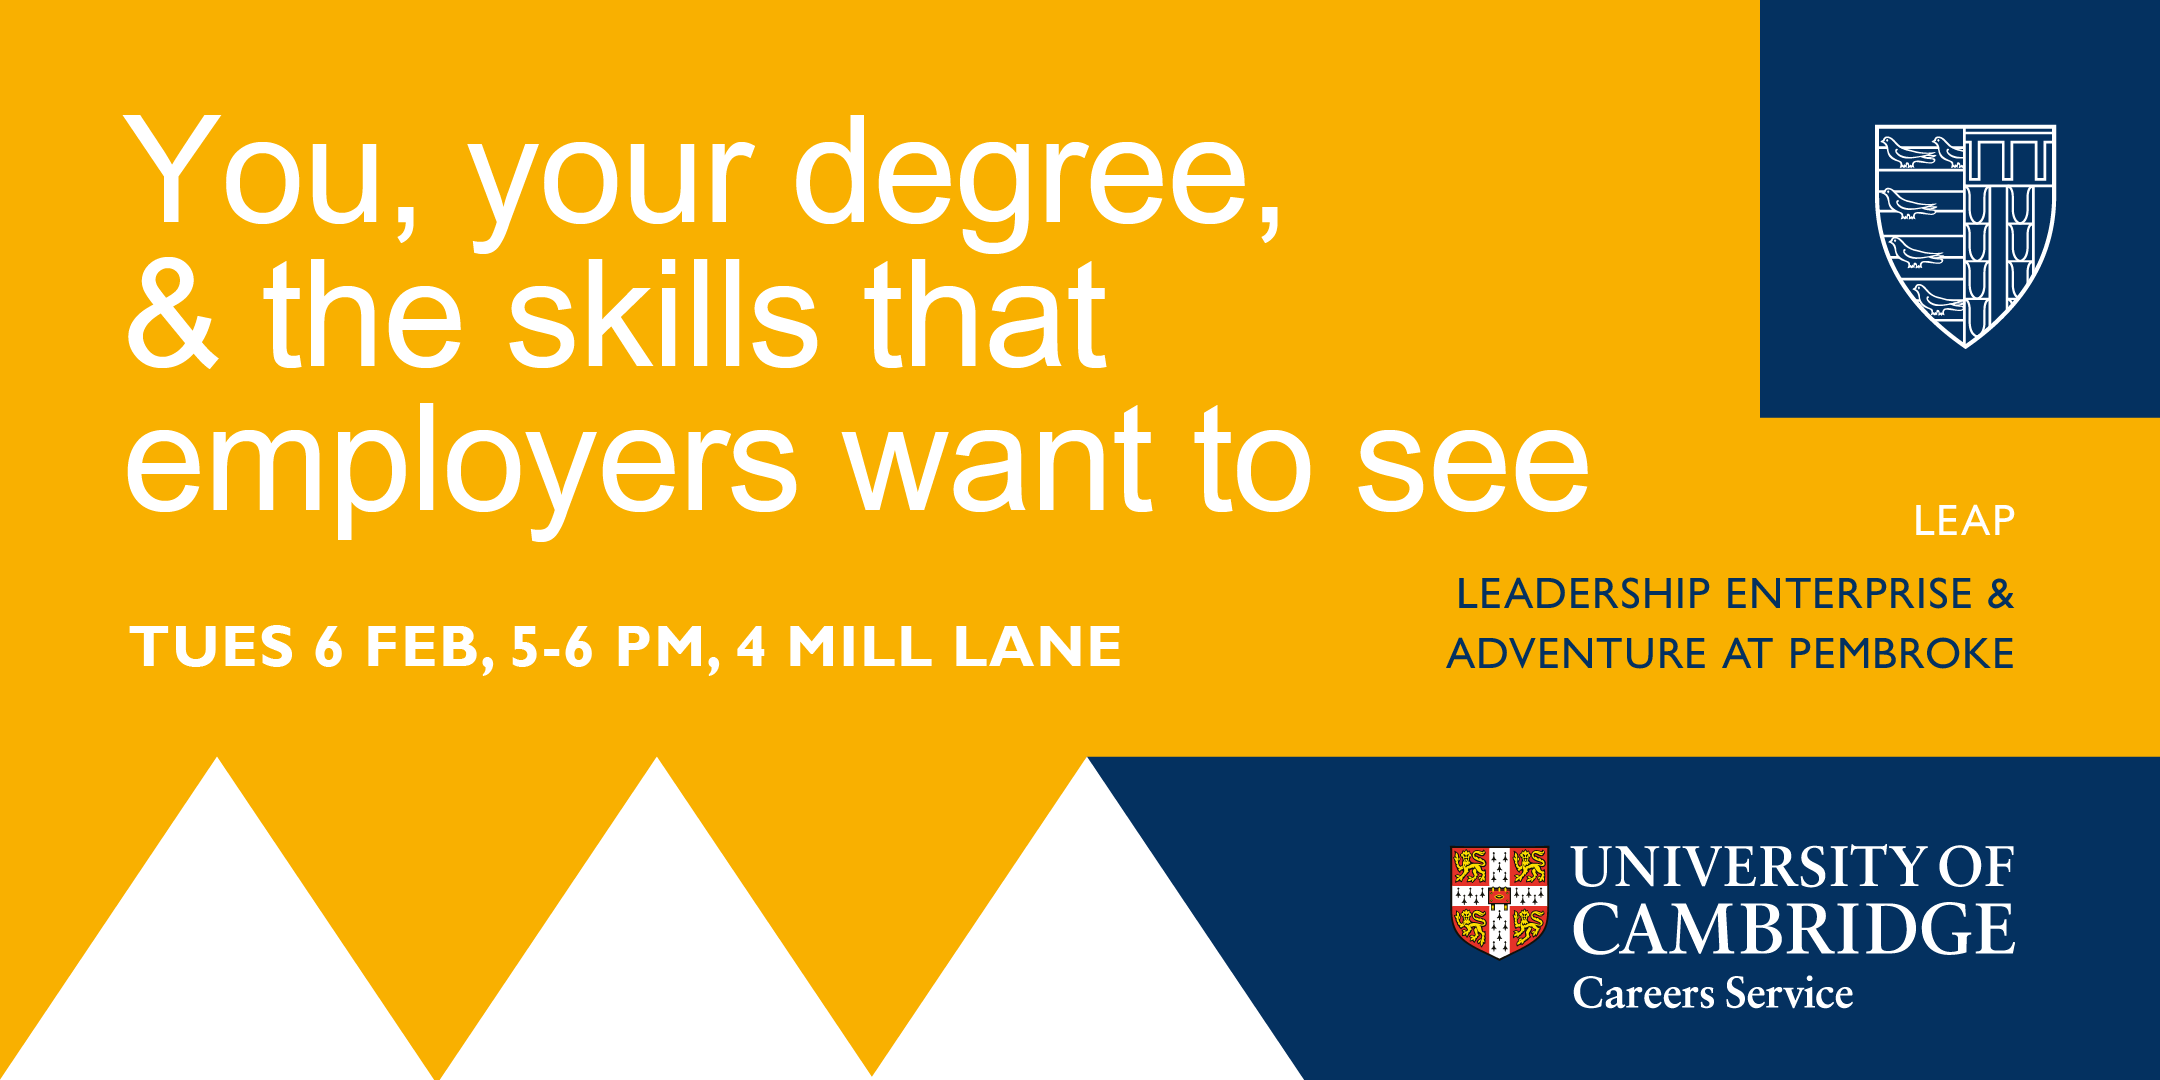 Poster for workshop on You, Your Degree & the Skills Employers Want to See